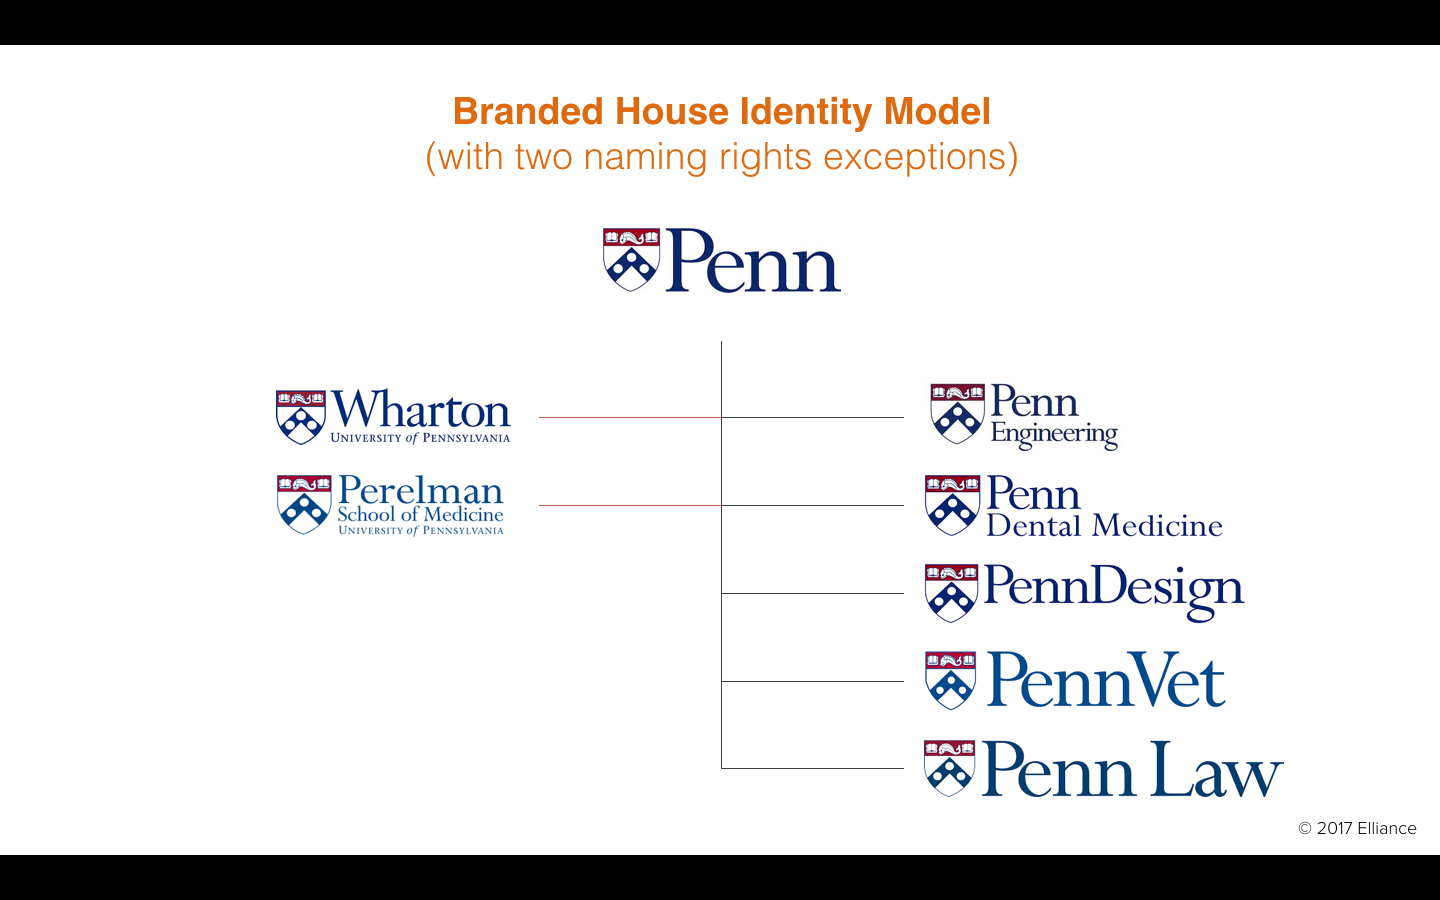 Branded House Brand Architecture with Exceptions for higher education